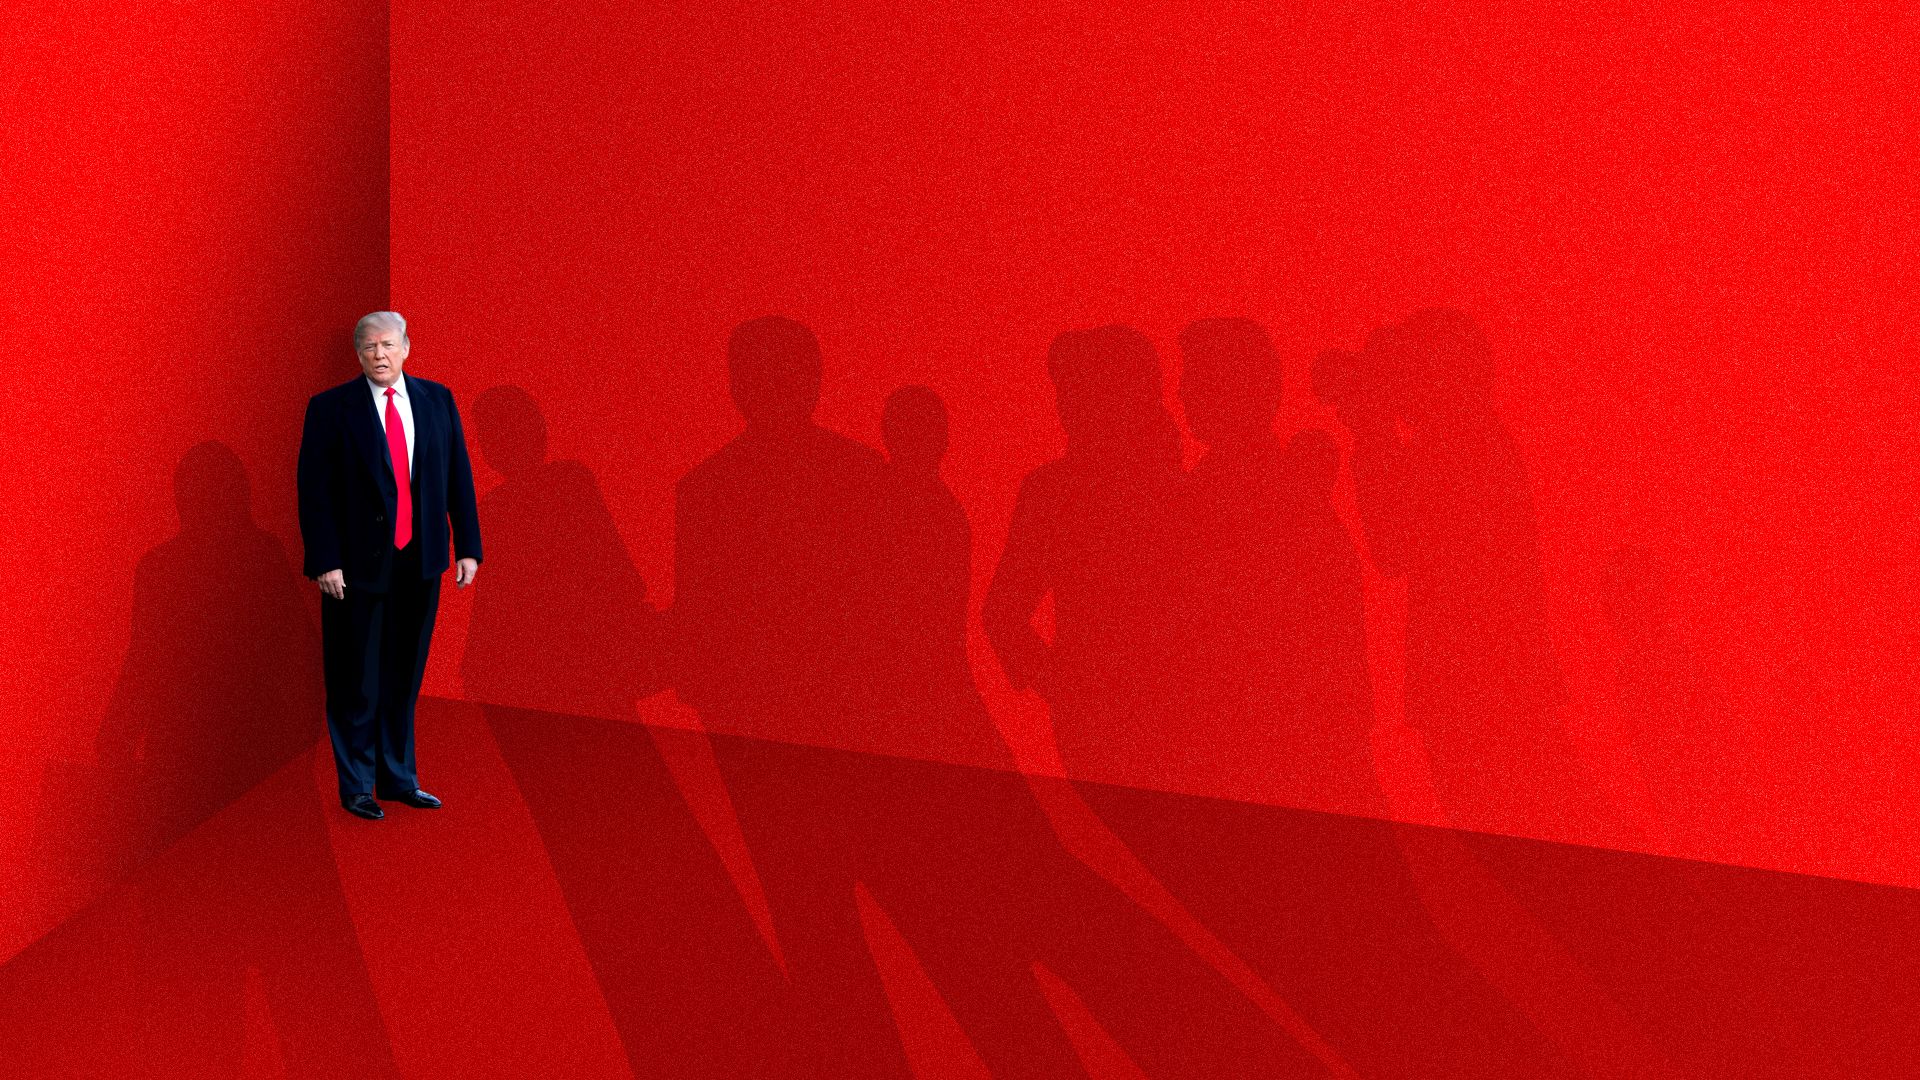 Illustration of President Trump in a corner with tall shadows of other people looming before him